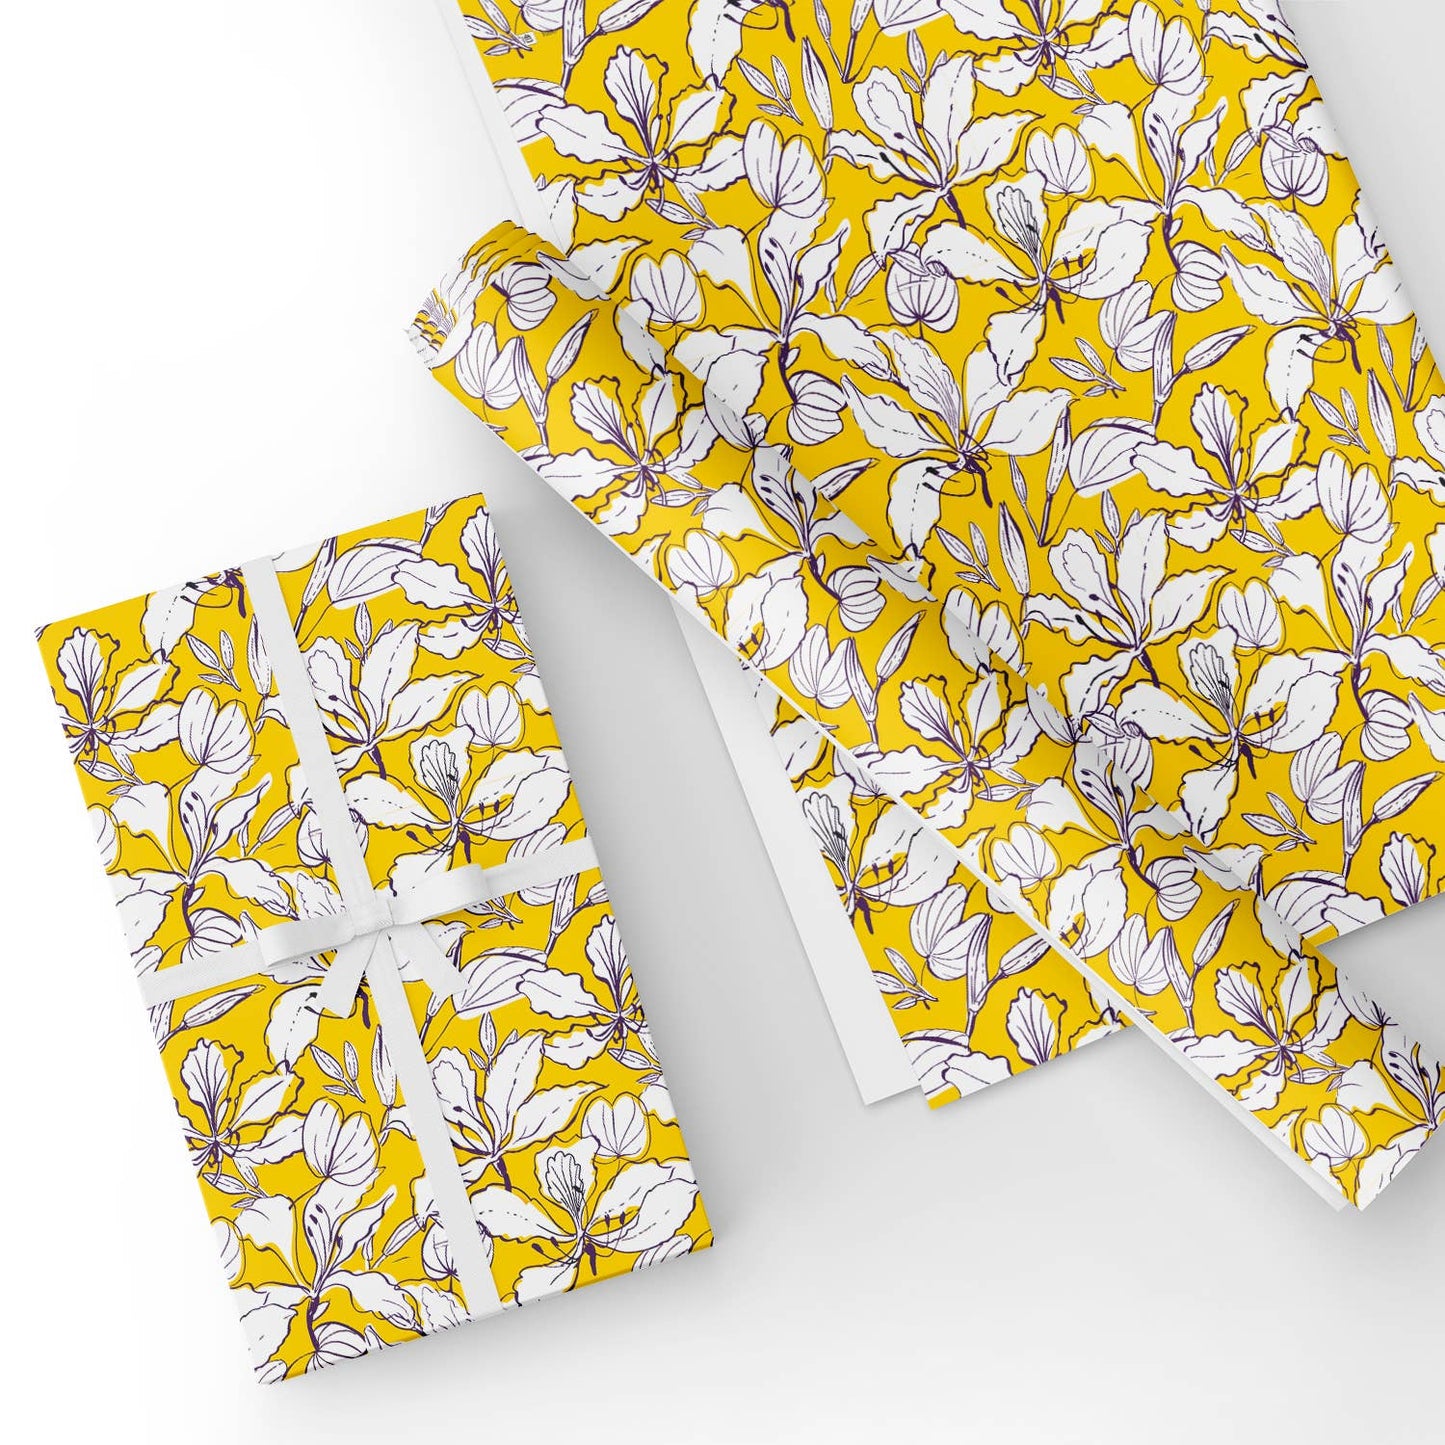 Lily in Bright Yellow Flat Wrapping Paper Sheet Wholesale Wraphaholic